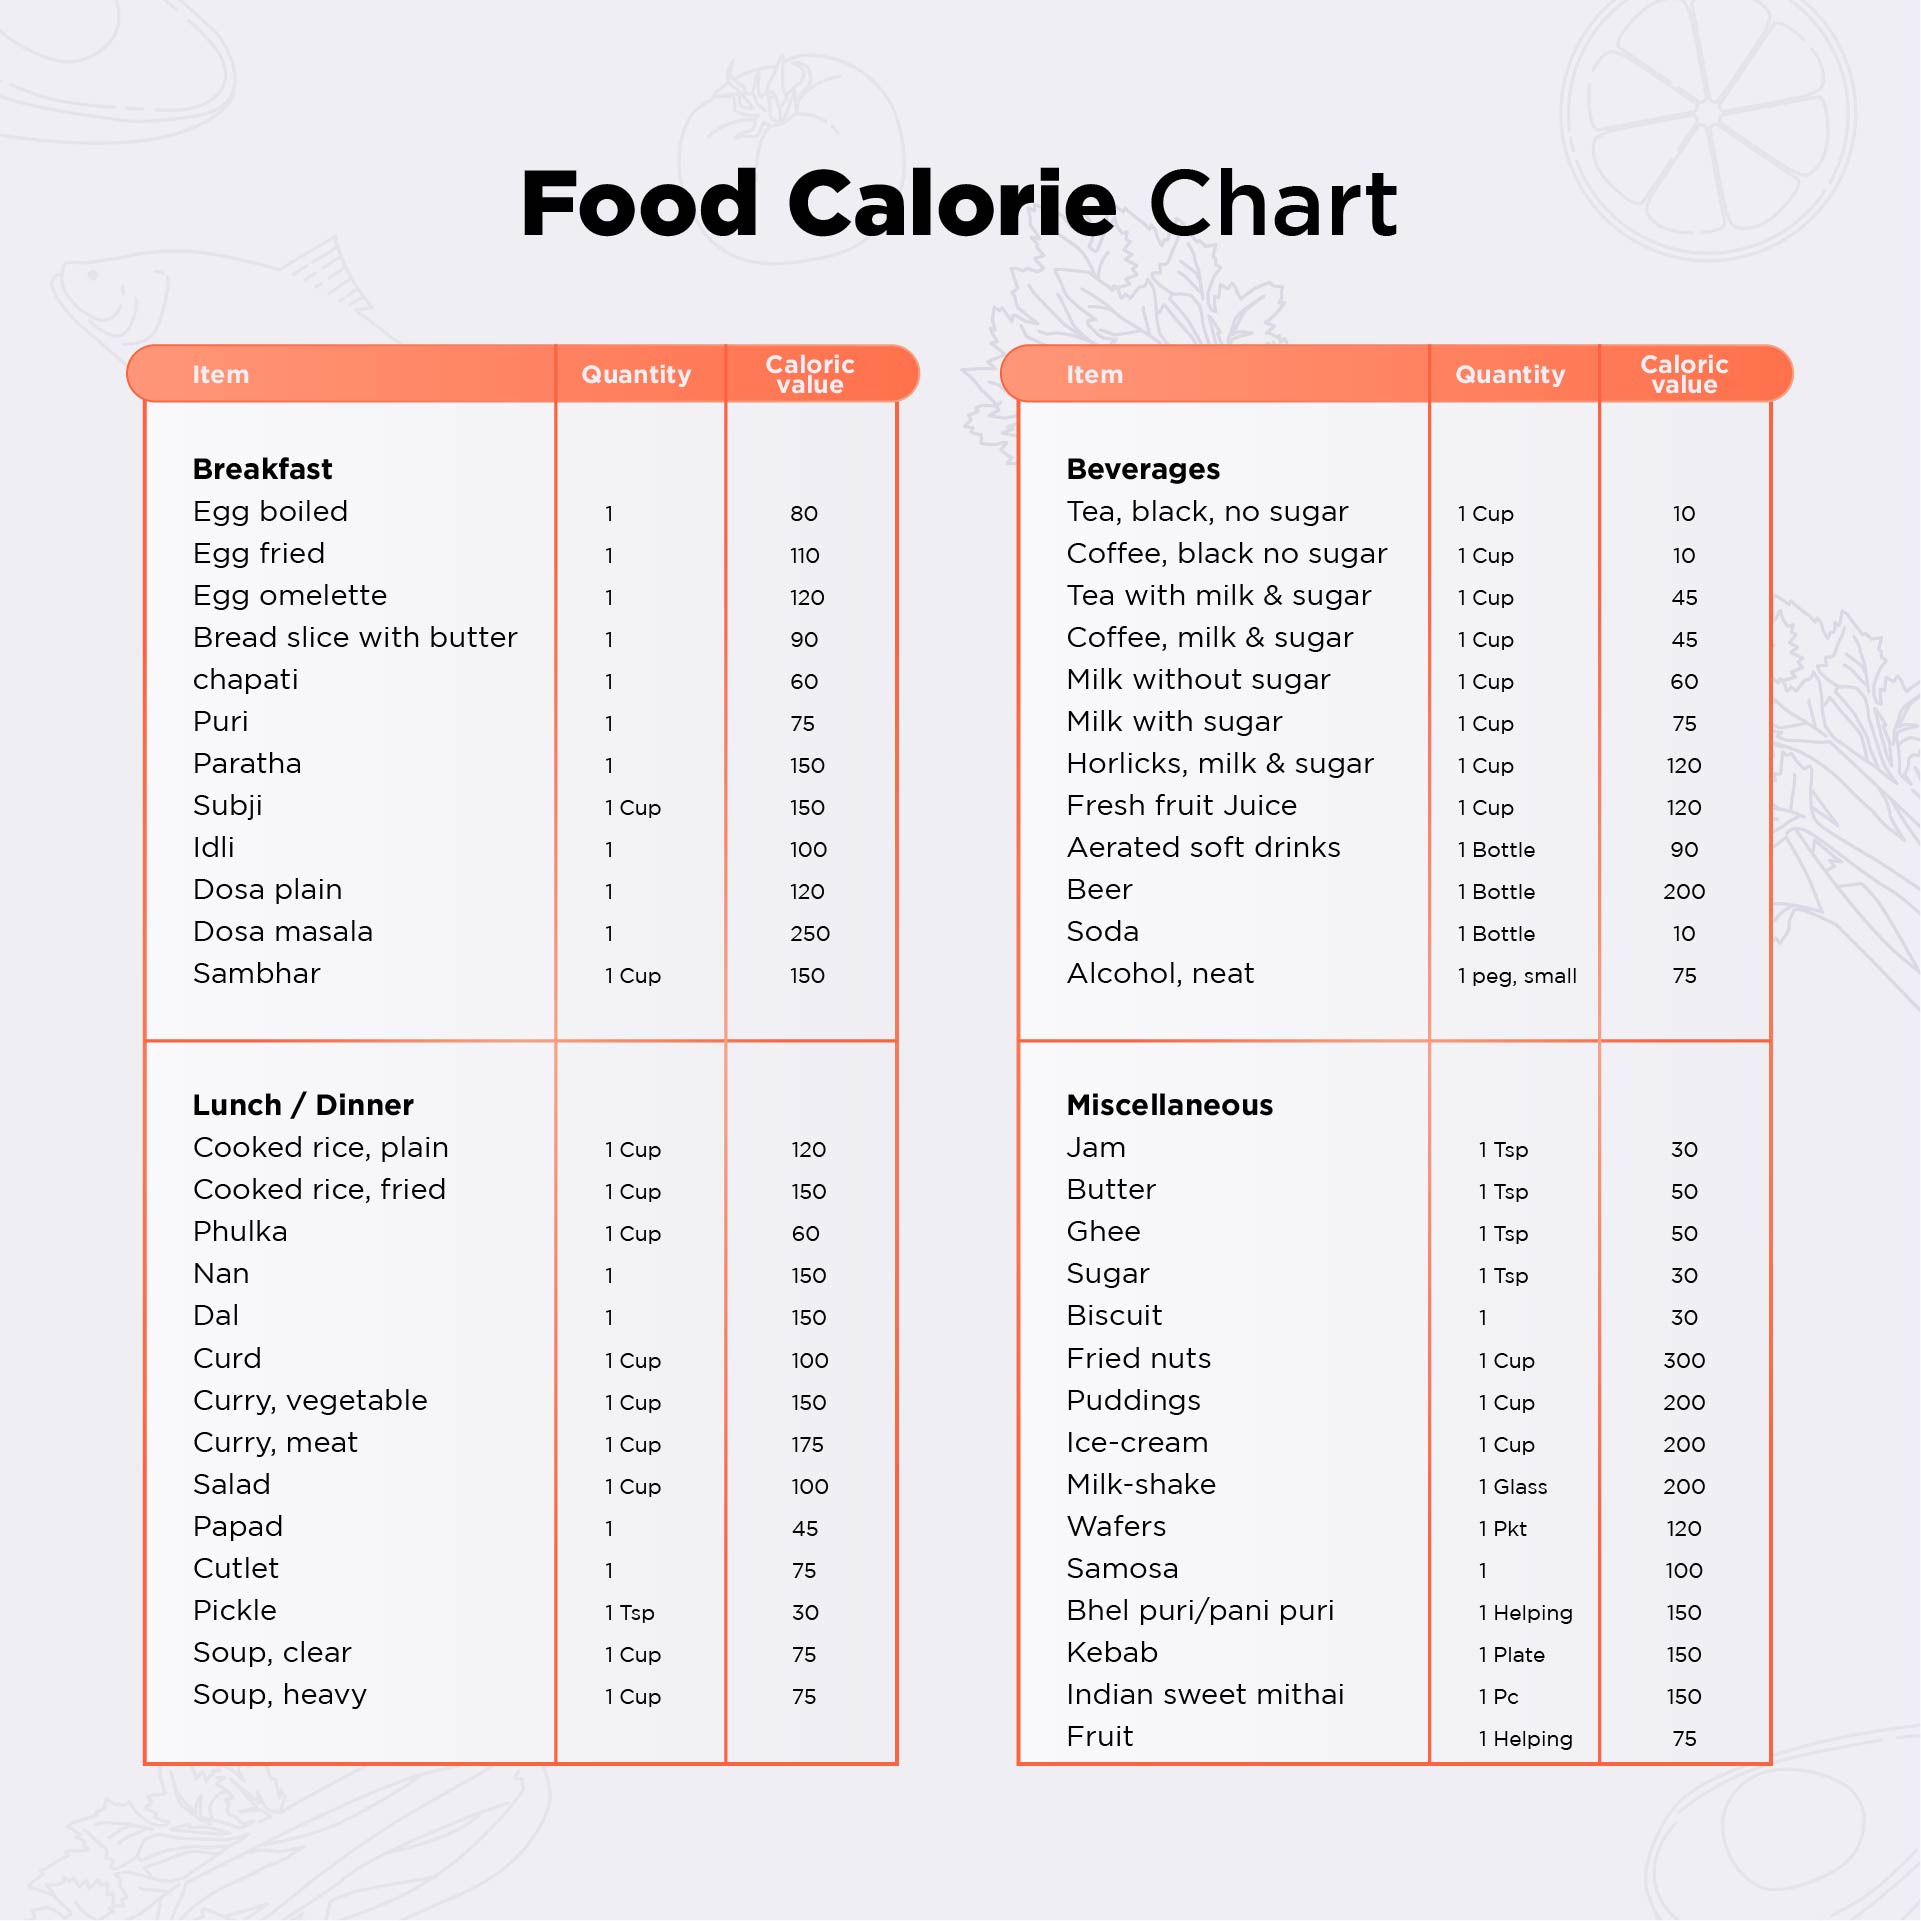 diet-simplified-alphabetical-calorie-chart-collectibles-art-collectibles-awaji-omiyage